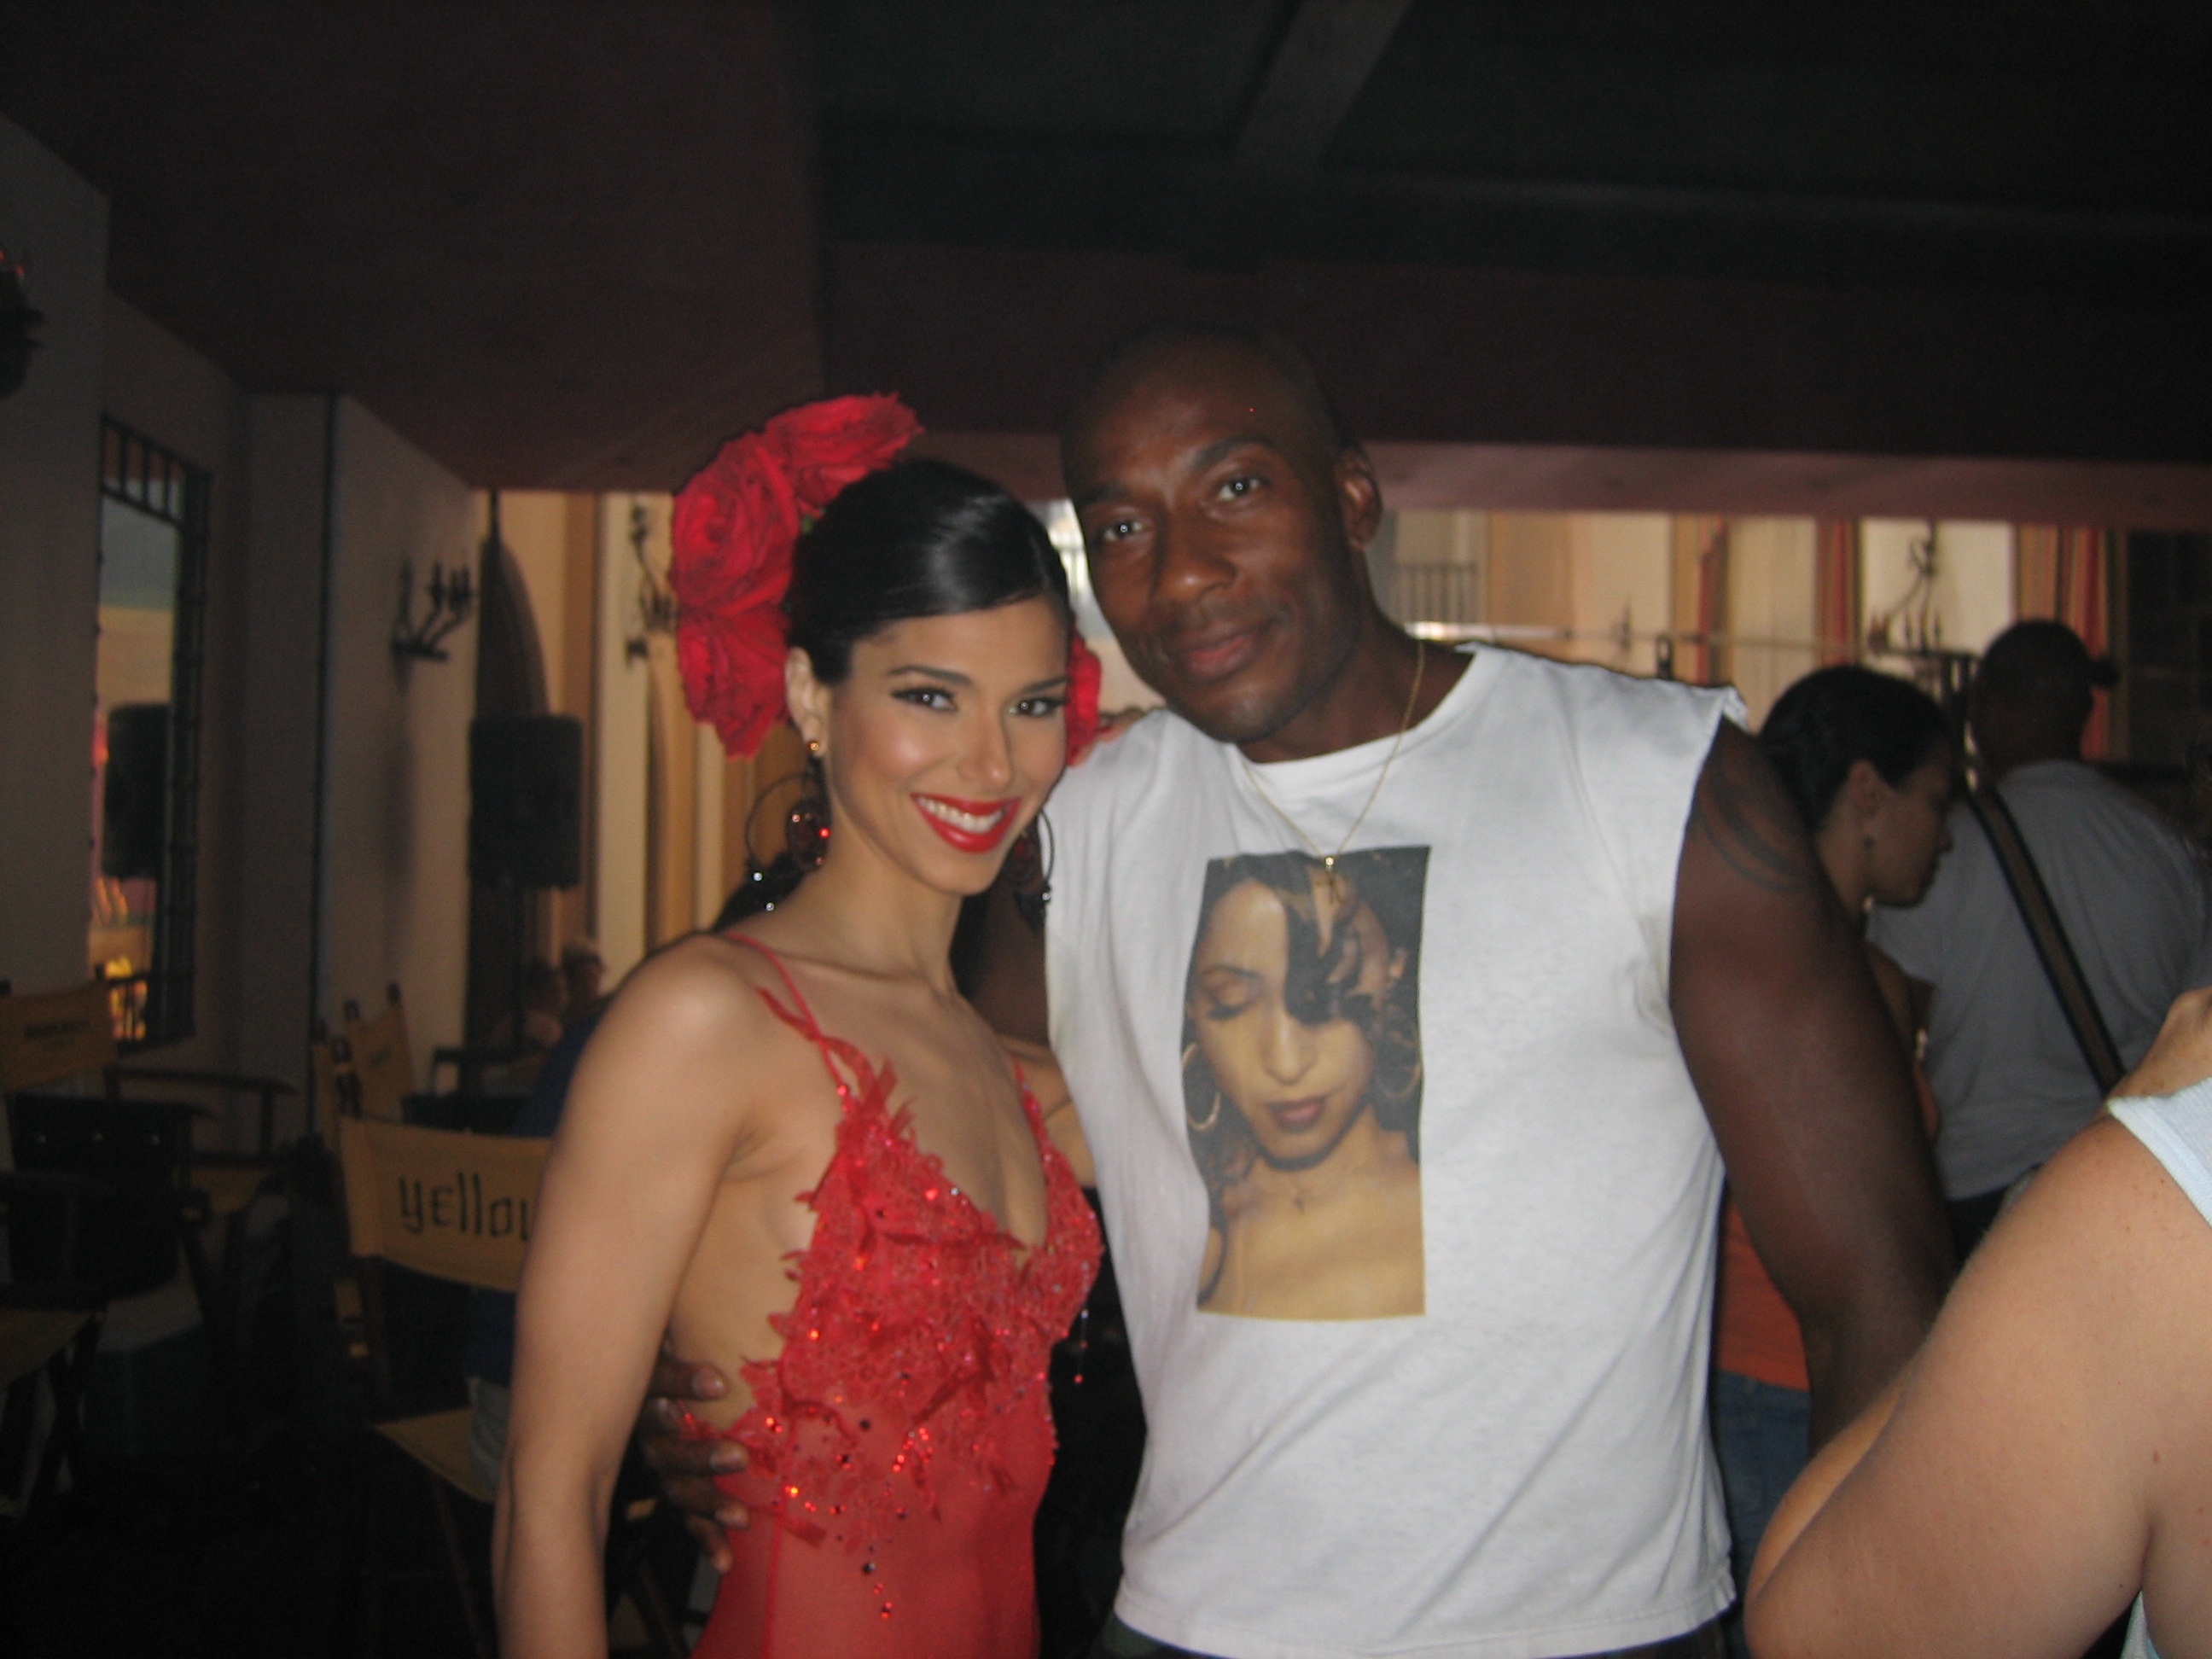 Carlton and Roselyn Sanchez on the set of YELLOW.Carlton choreographed the film and Roselyn starred in it.